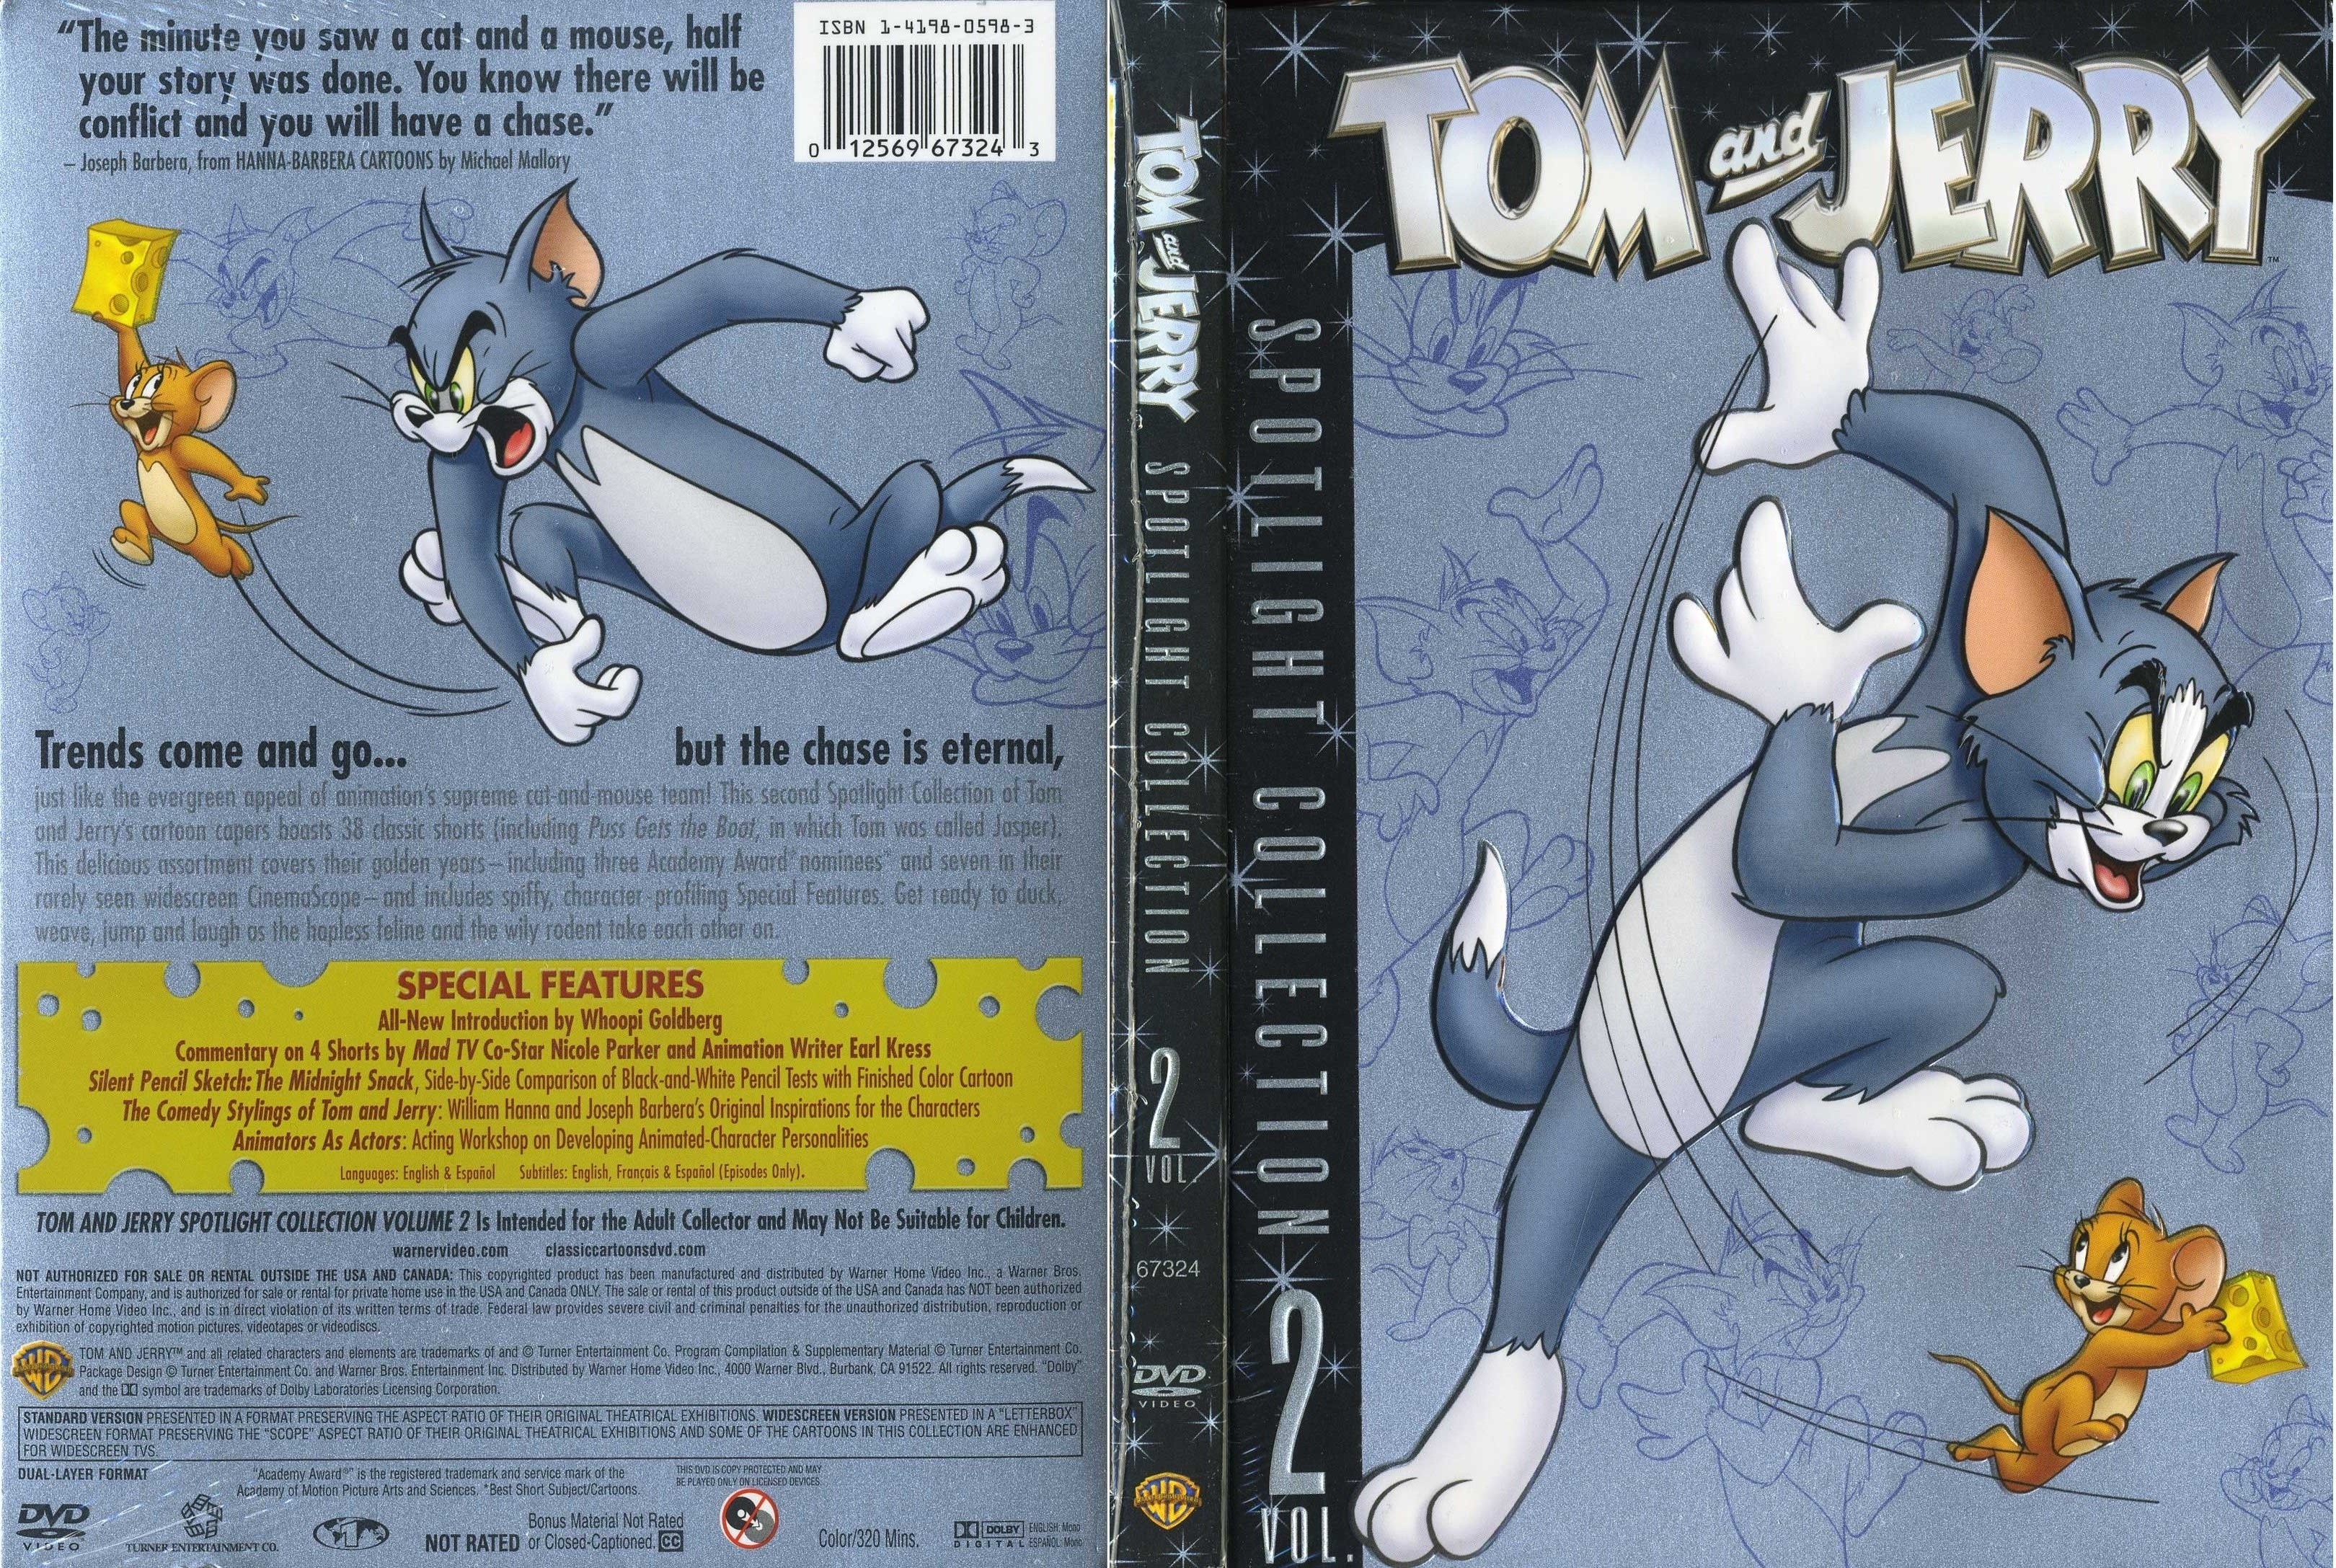 Jaquette DVD Tom & Jerry vol 2 (Canadienne)